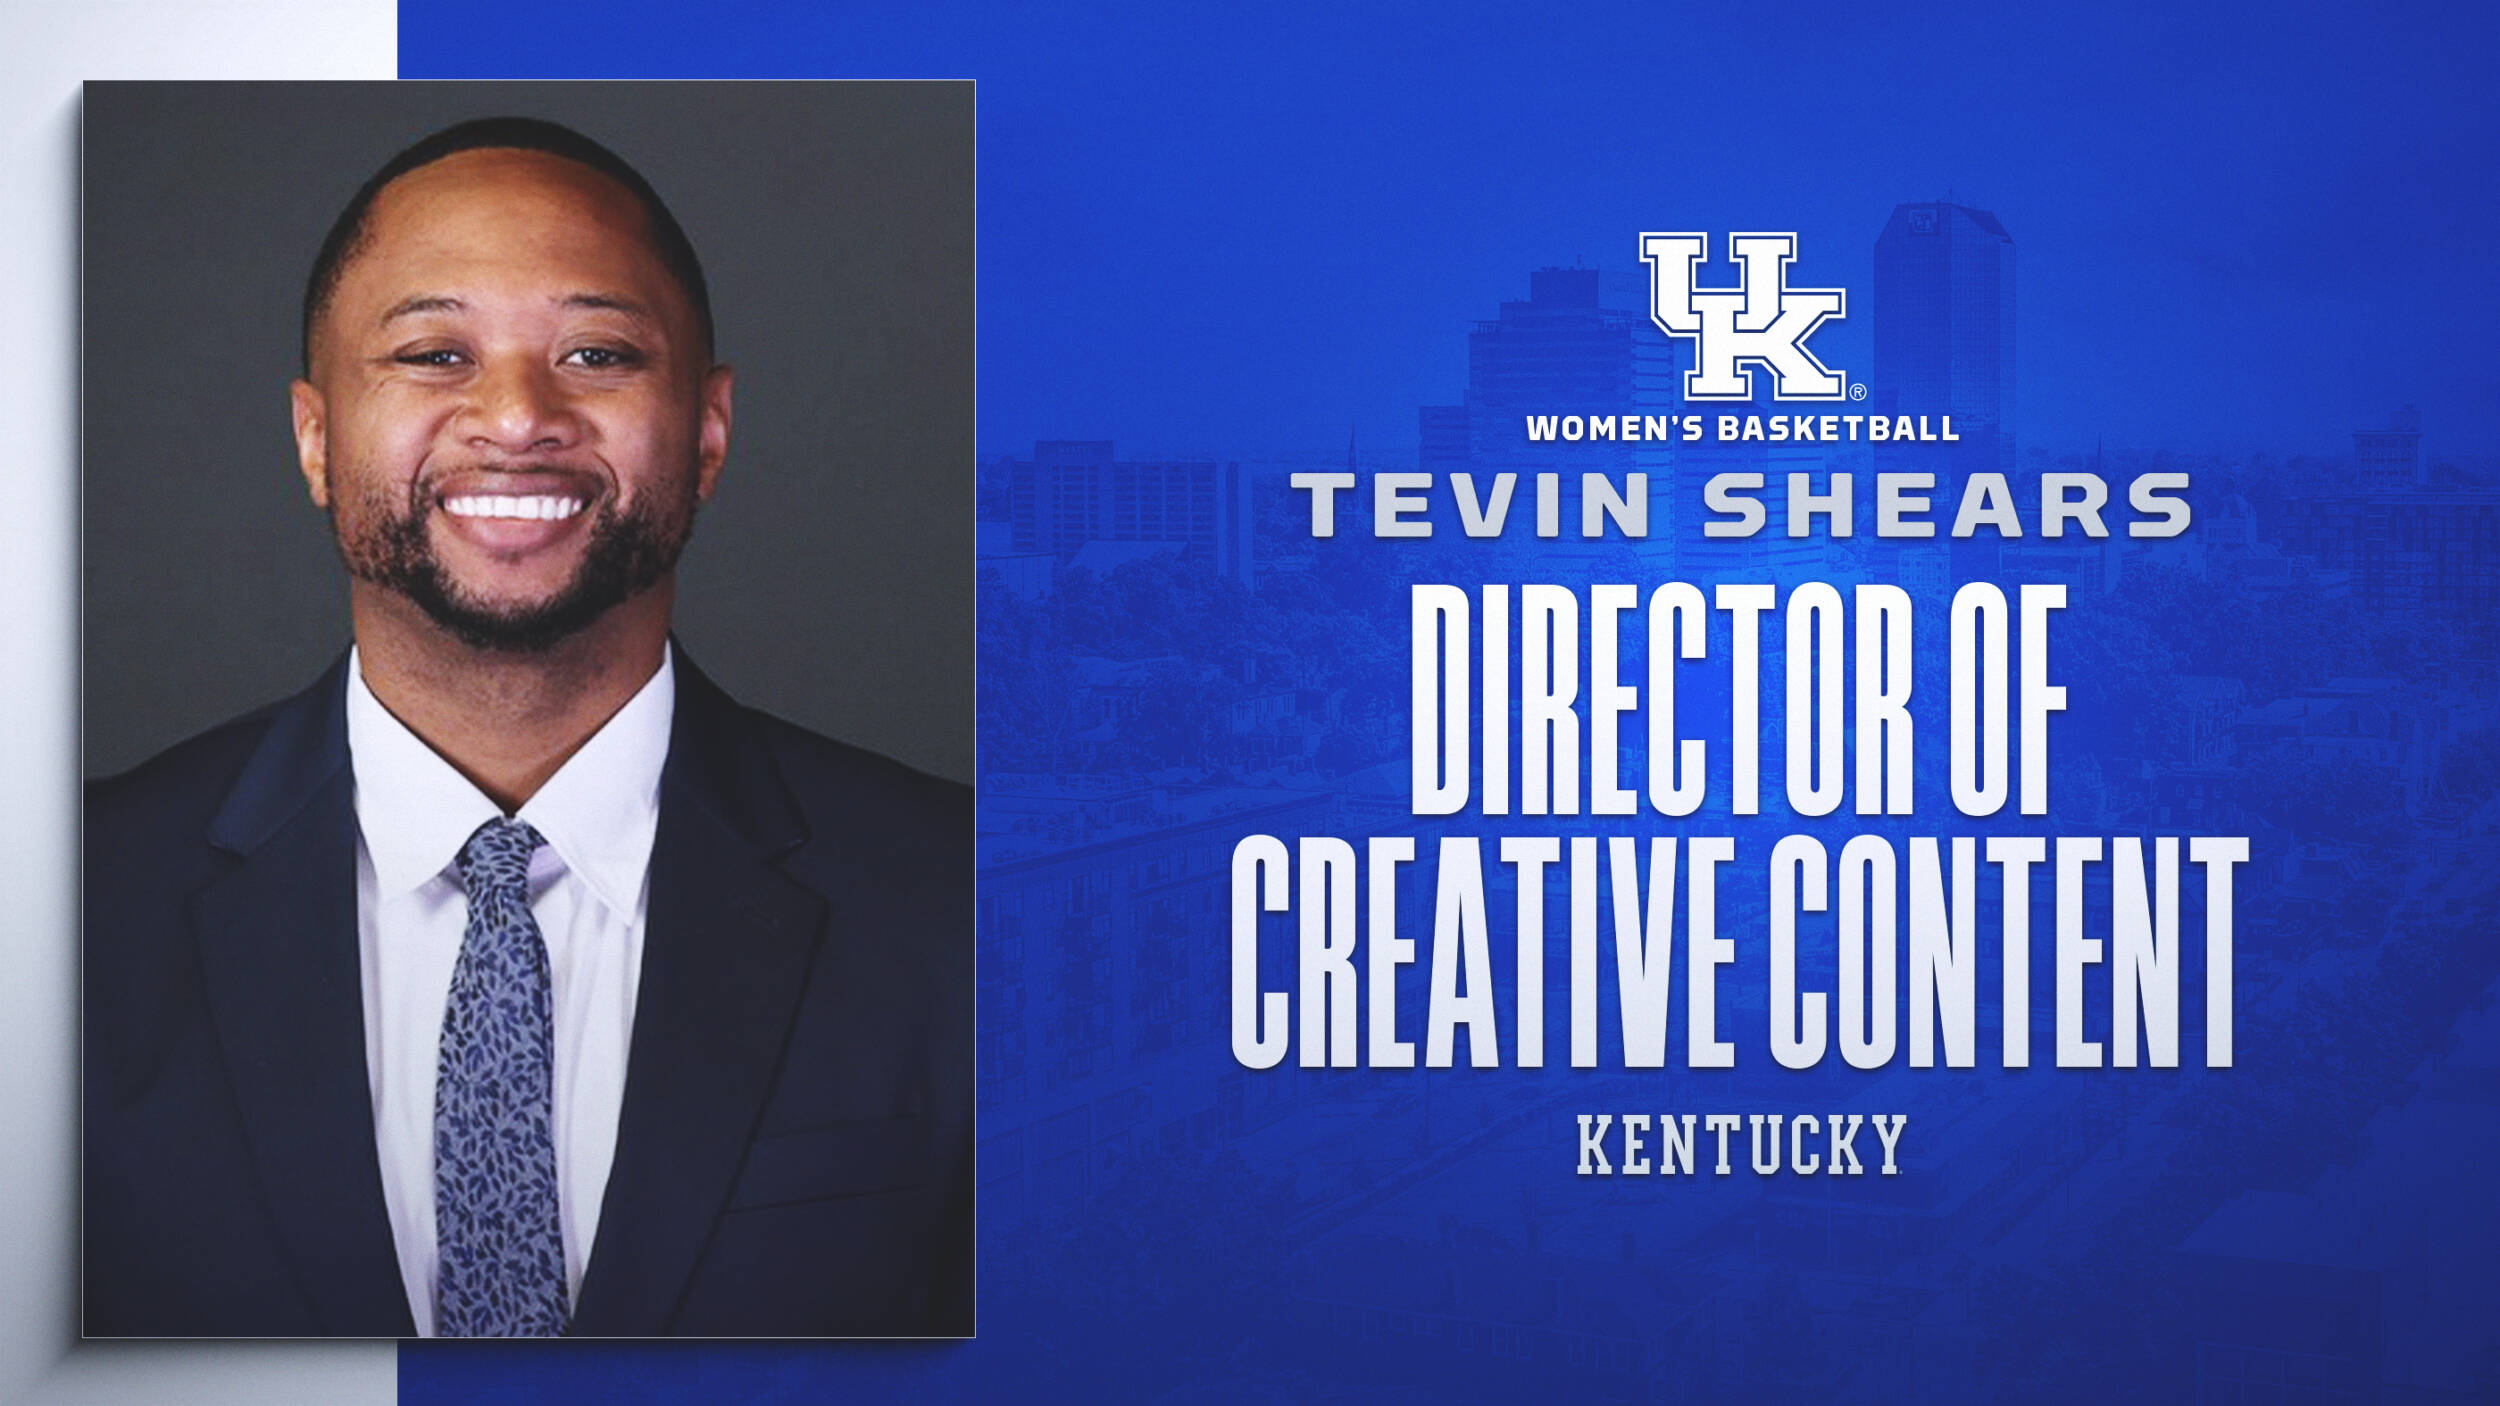 Kenny Brooks Has Hired Tevin Shears as the Director of Creative Content